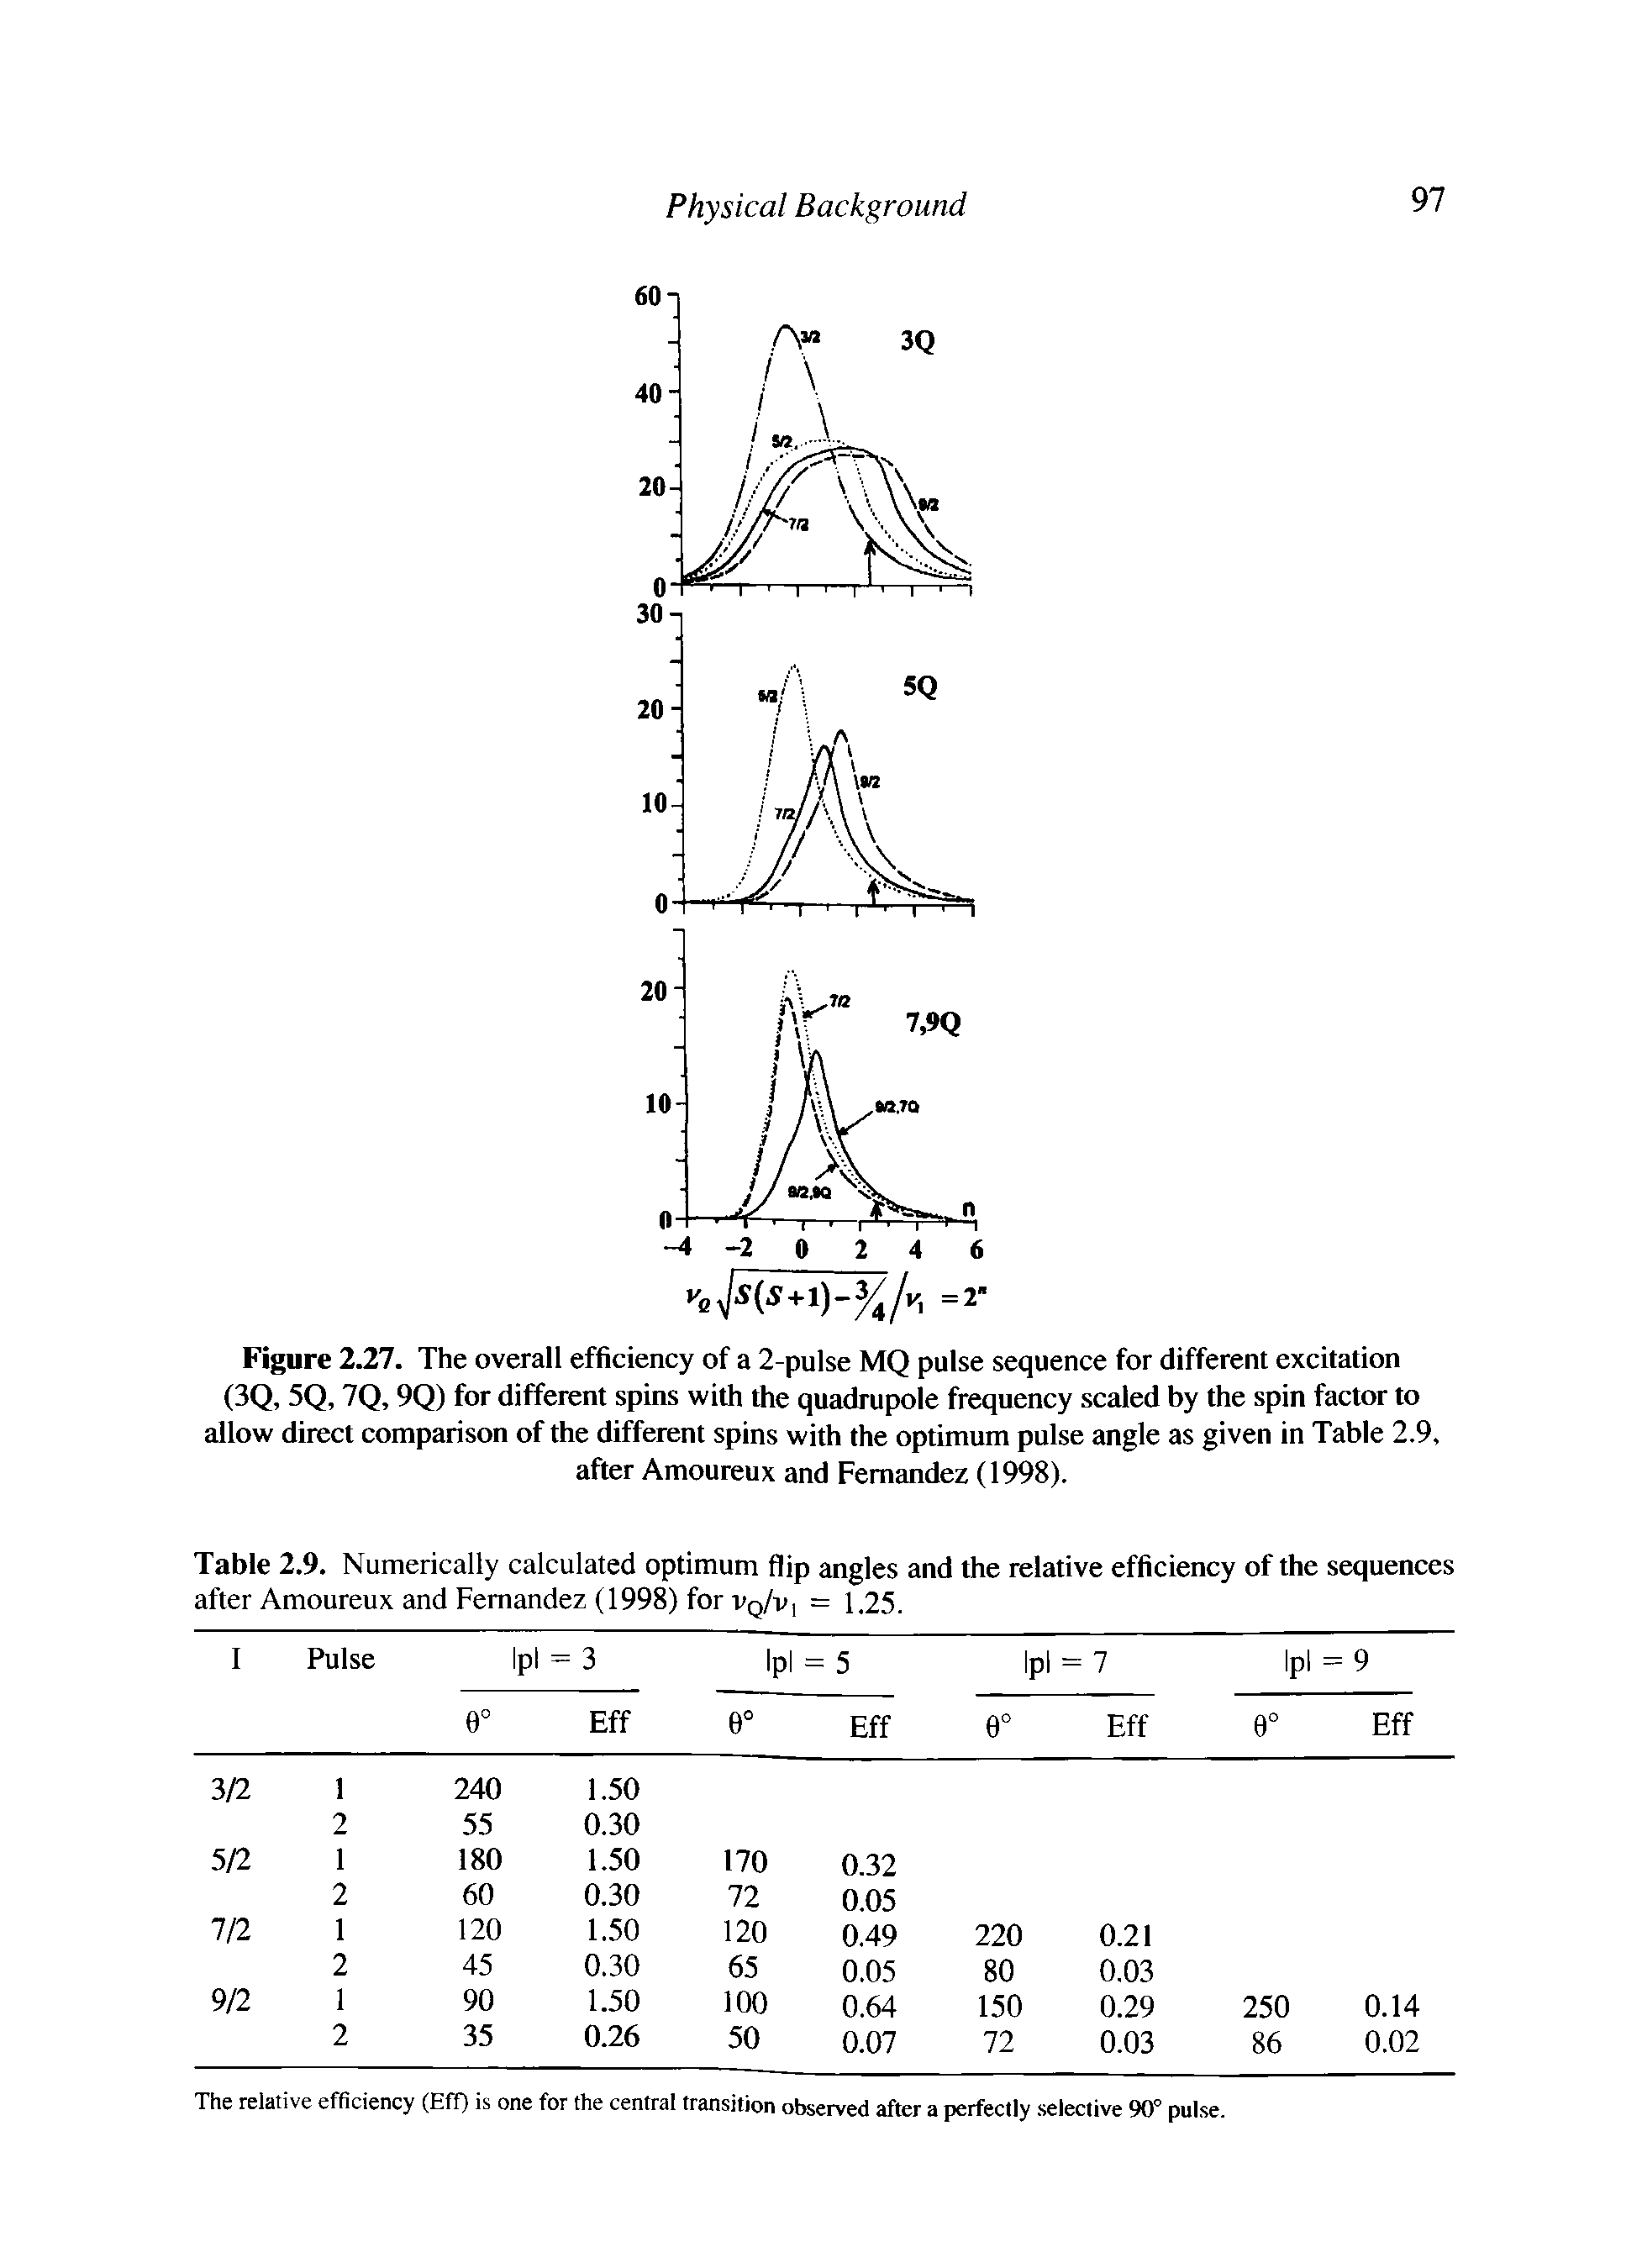 Figure 2.27. The overall efficiency of a 2-pulse MQ pulse sequence for different excitation (3Q, 5Q, 7Q, 9Q) for different spins with the quadrupole frequency scaled by the spin factor to allow direct comparison of the different spins with the optimum pulse angle as given in Table 2.9, after Amoureux and Fernandez (1998).